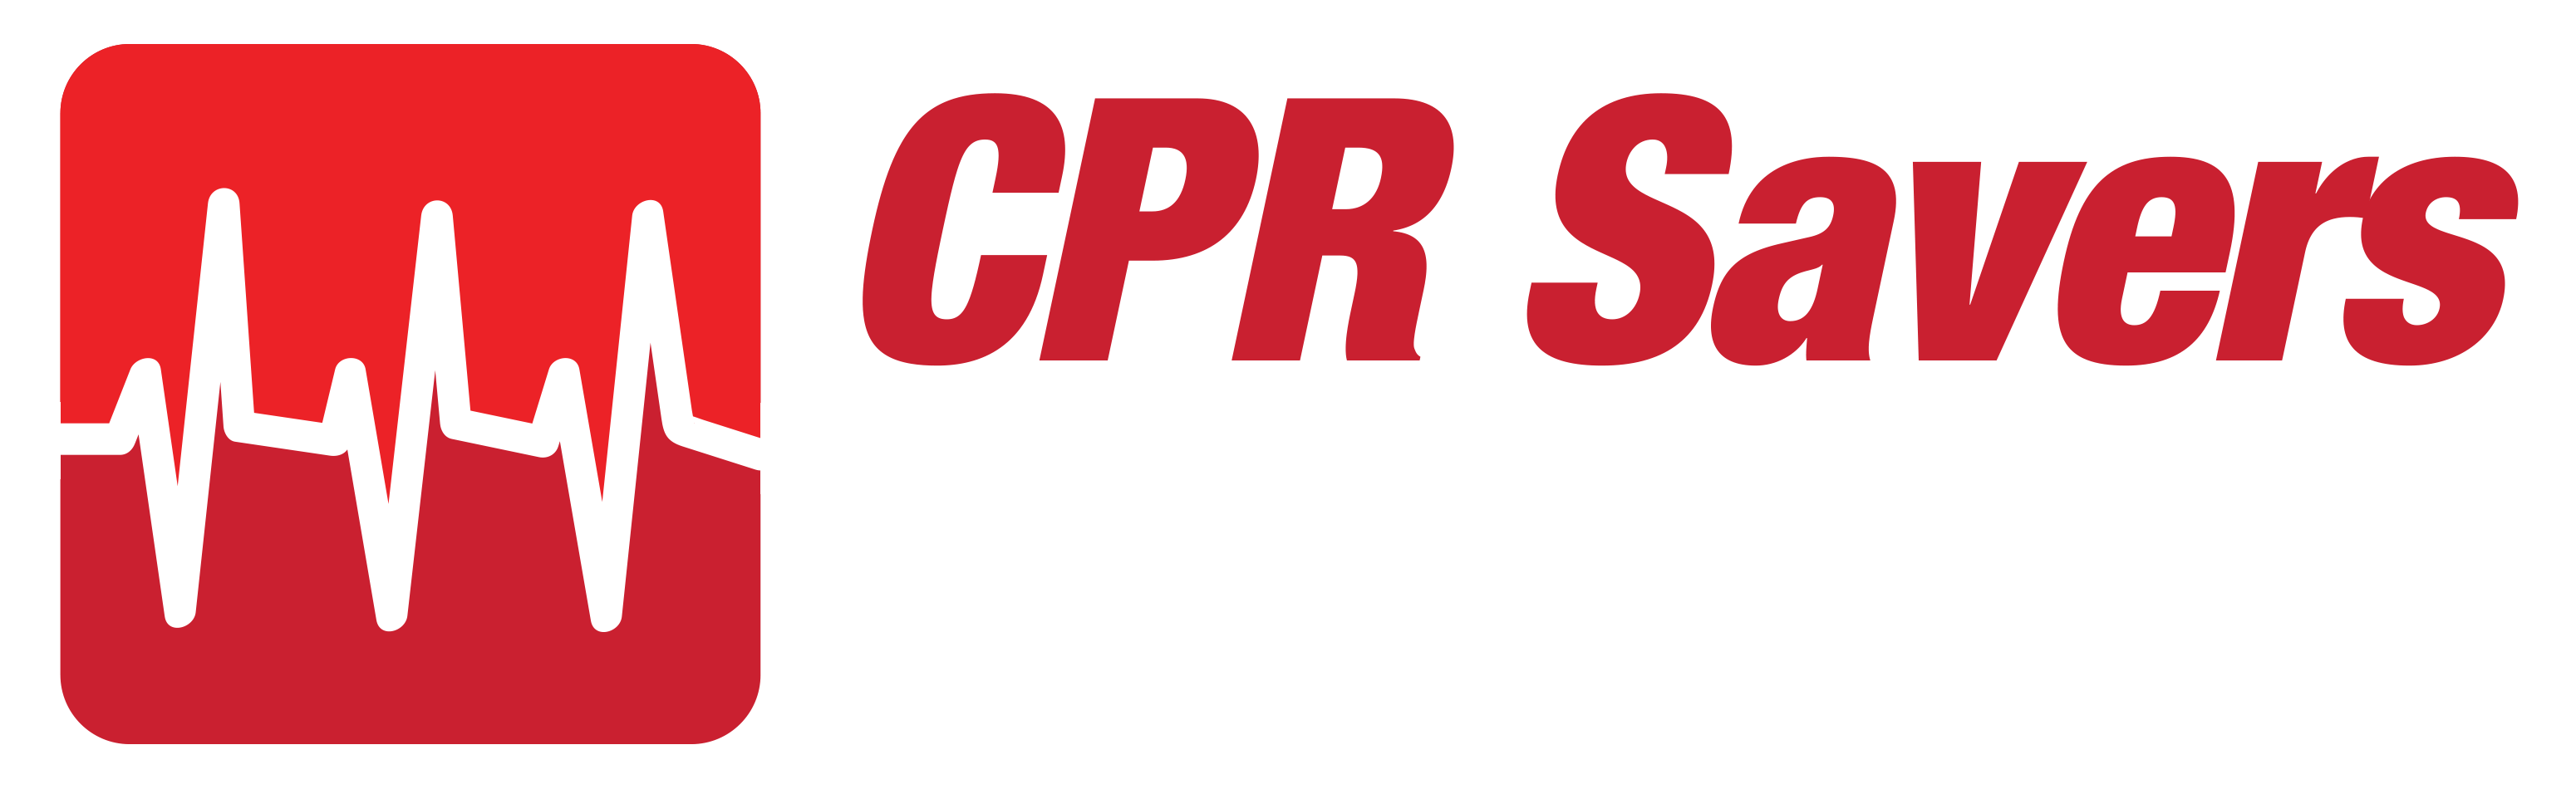 Cpr Savers Training Courses - Cpr Training, Transparent background PNG HD thumbnail